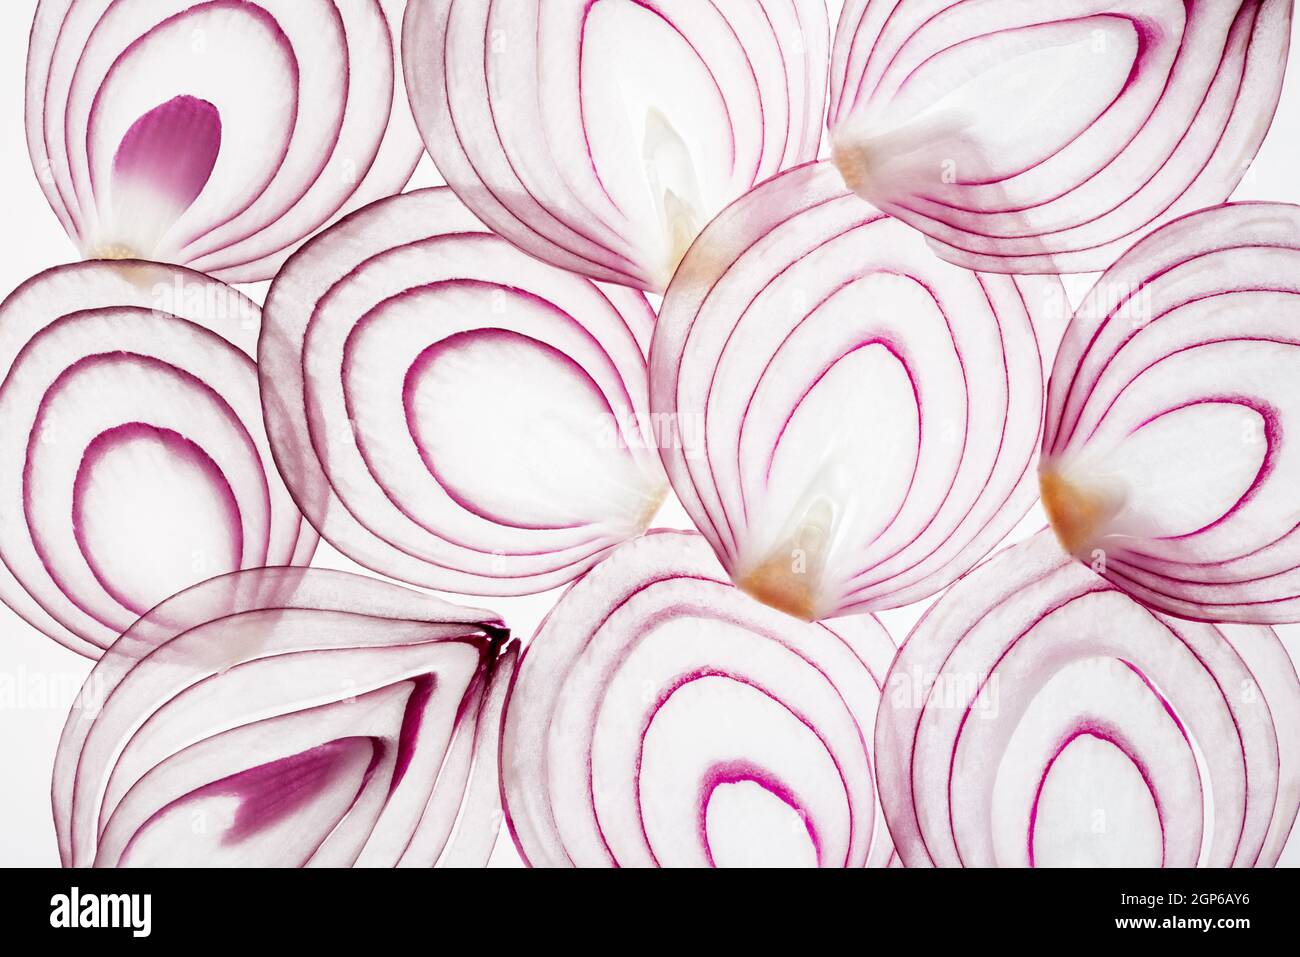 beautiful fresh sliced red onions background Stock Photo